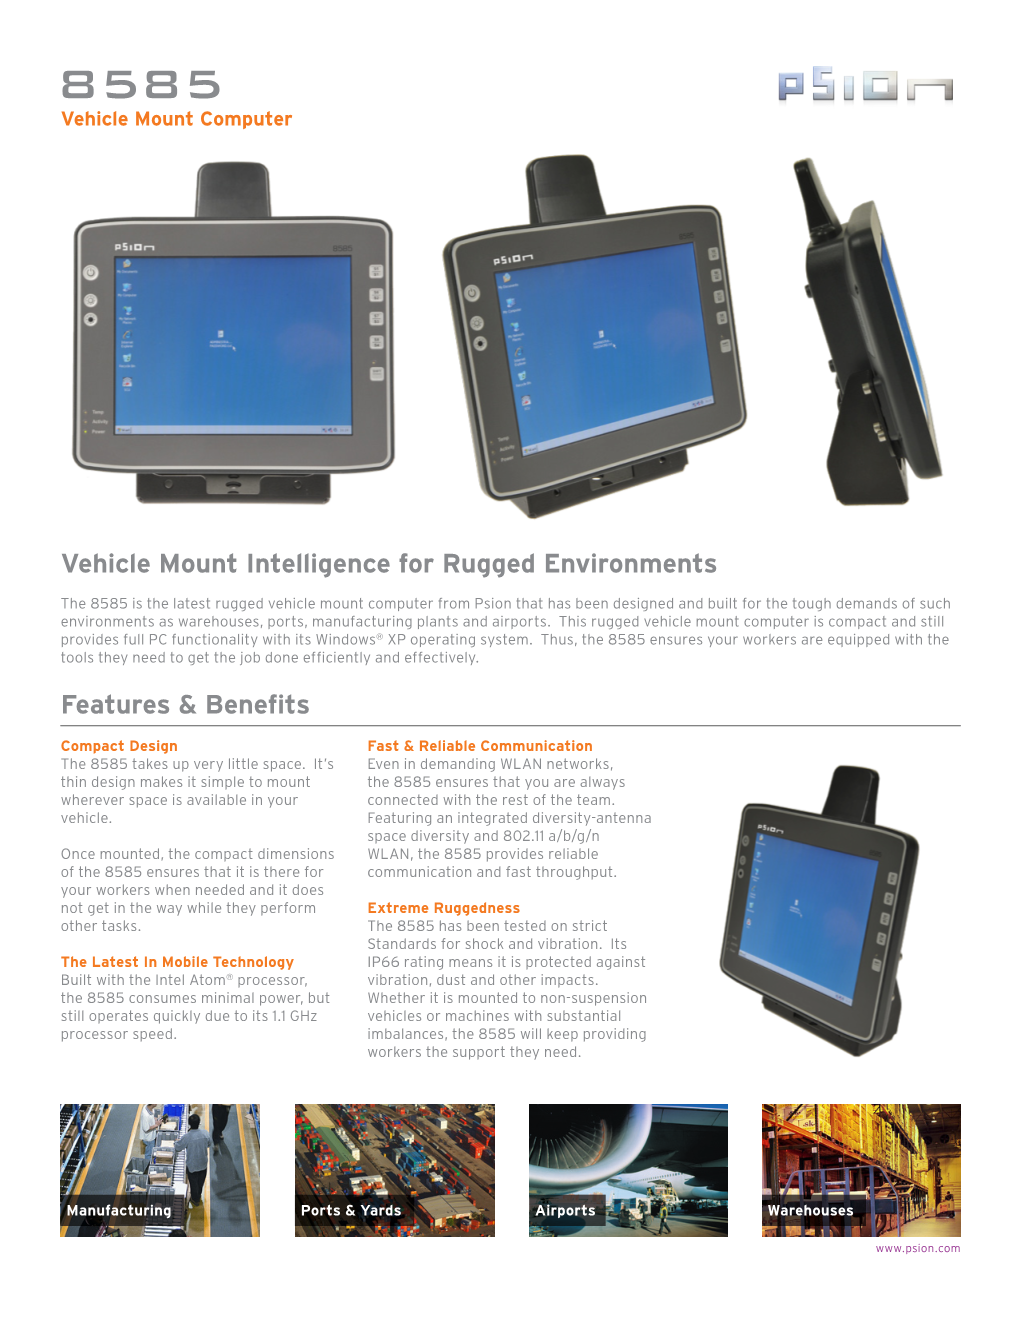 Features & Benefits Vehicle Mount Intelligence for Rugged Environments